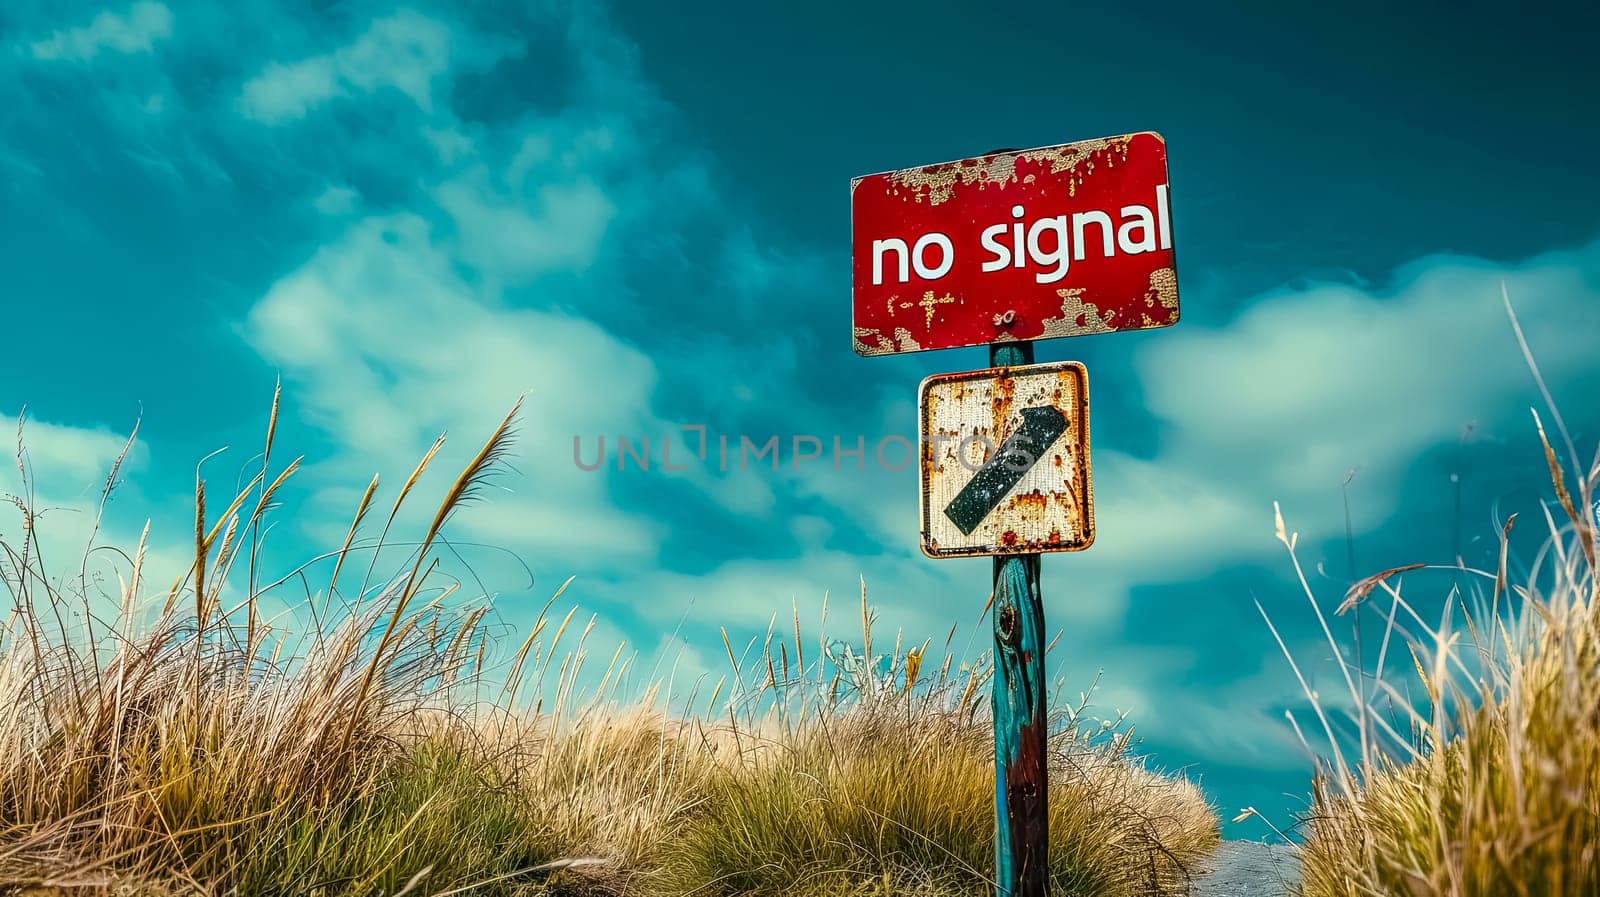 Rustic no signal sign against cloudy sky by Edophoto